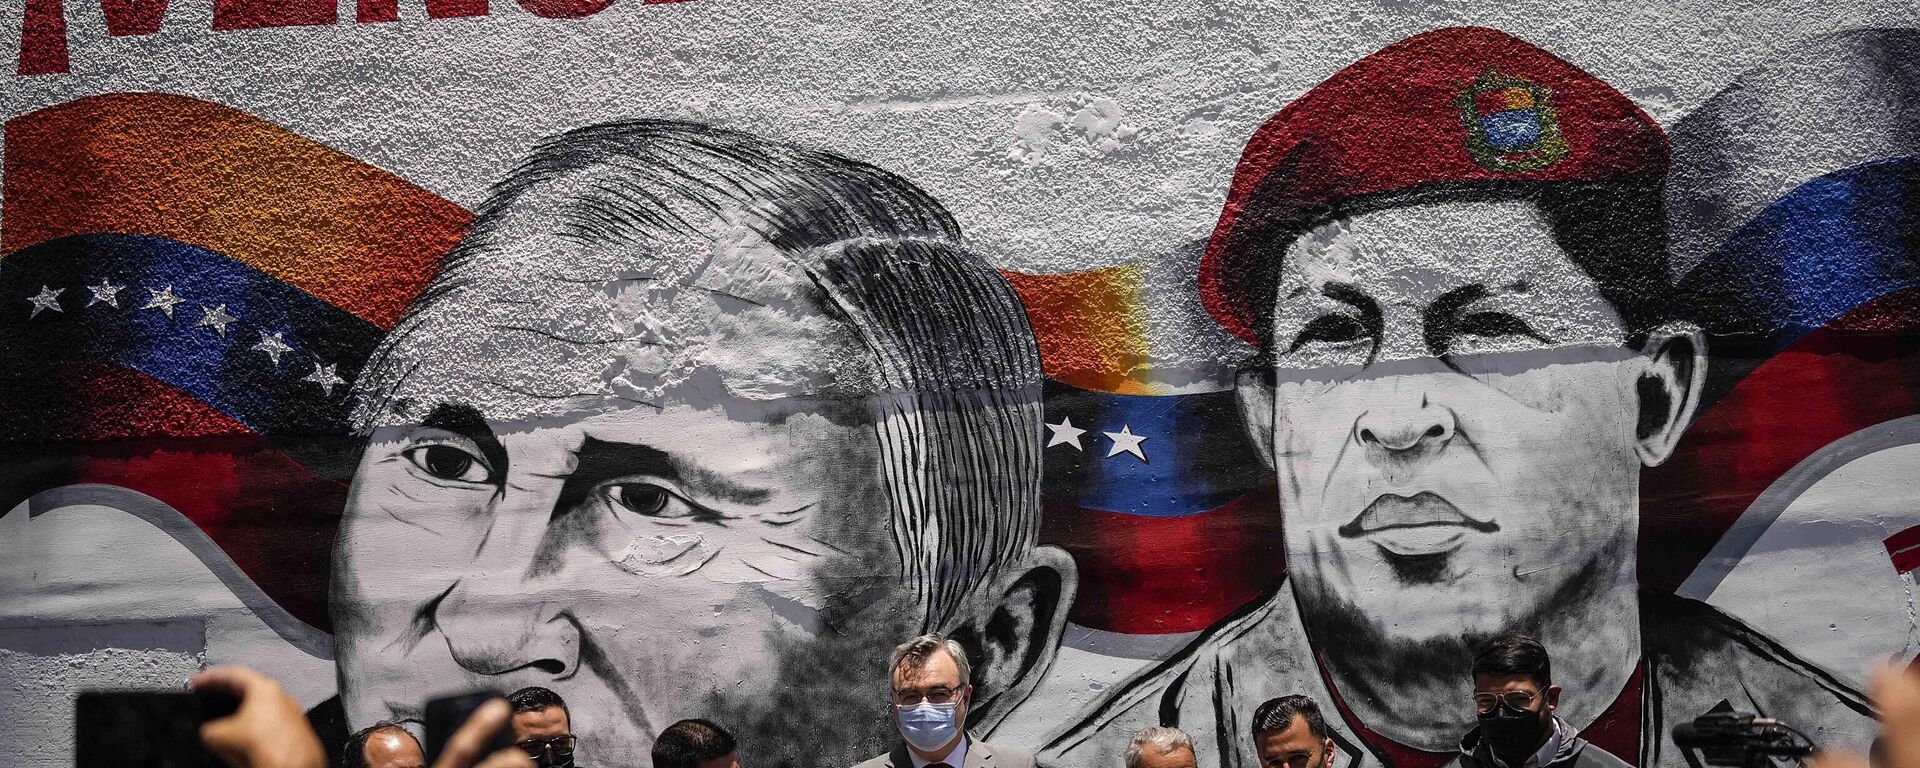 Russian Ambassador to Venezuela, Sergey Melik Bagdasarov, center, stands in front of a mural featuring Russian President Vladimir Putin and the late President Hugo Chavez, during an event to inaugurate a basketball and soccer venue, in the Catia neighborhood of Caracas, Venezuela, Saturday, April 2, 2022.  - Sputnik International, 1920, 17.08.2022